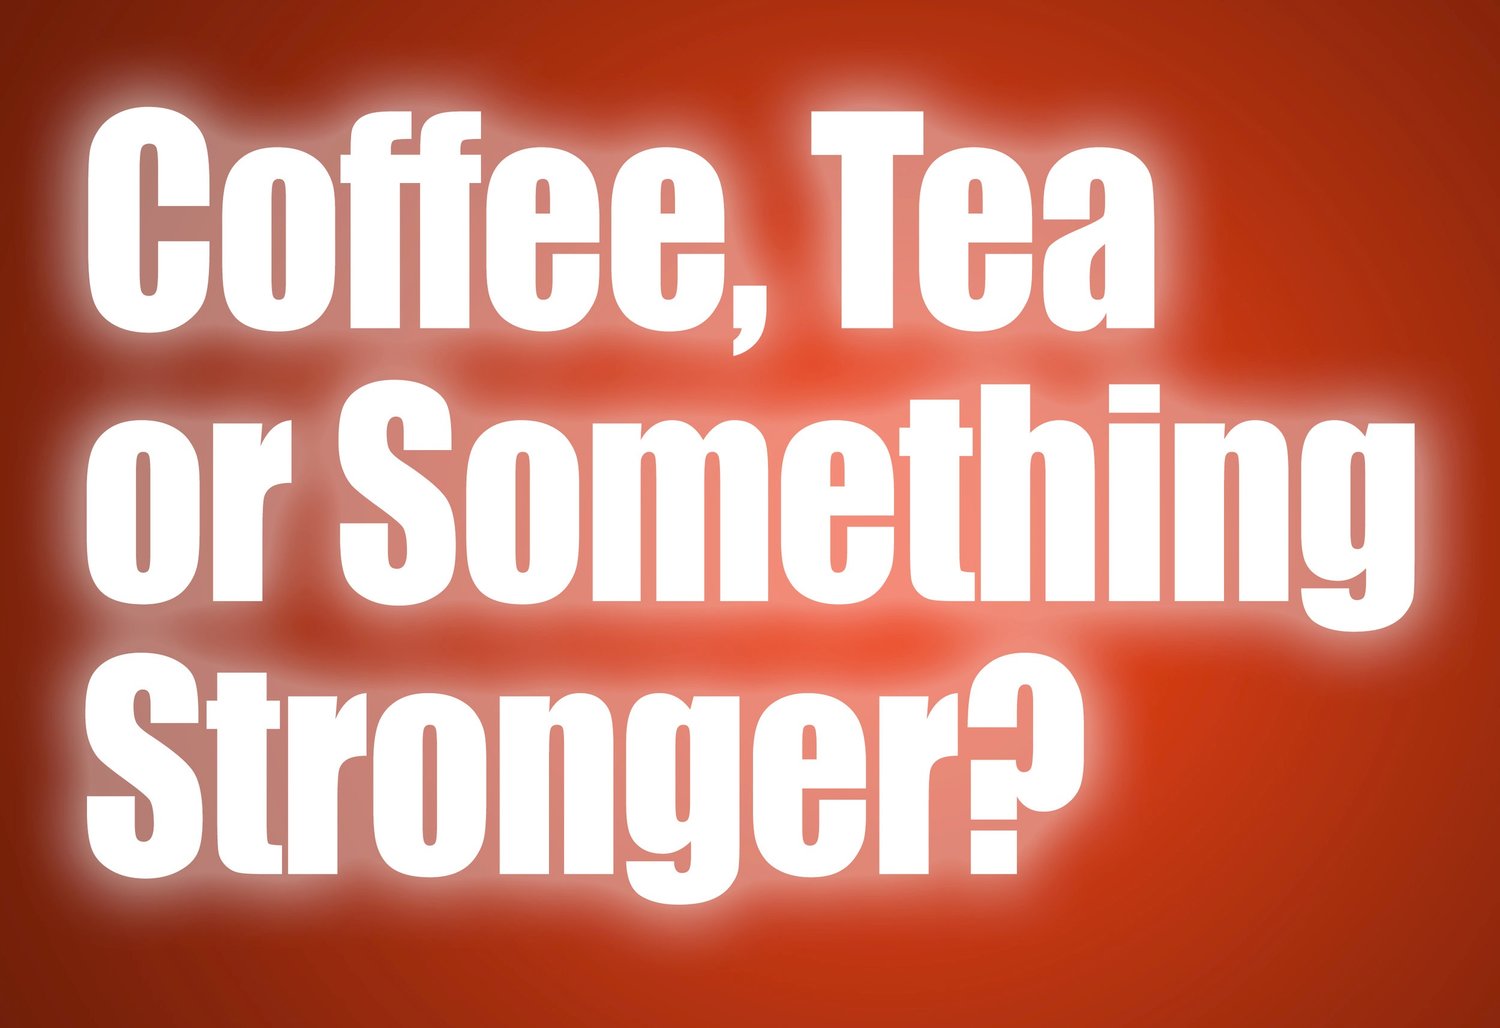 Trailer for Coffee, Tea or Something Stronger?